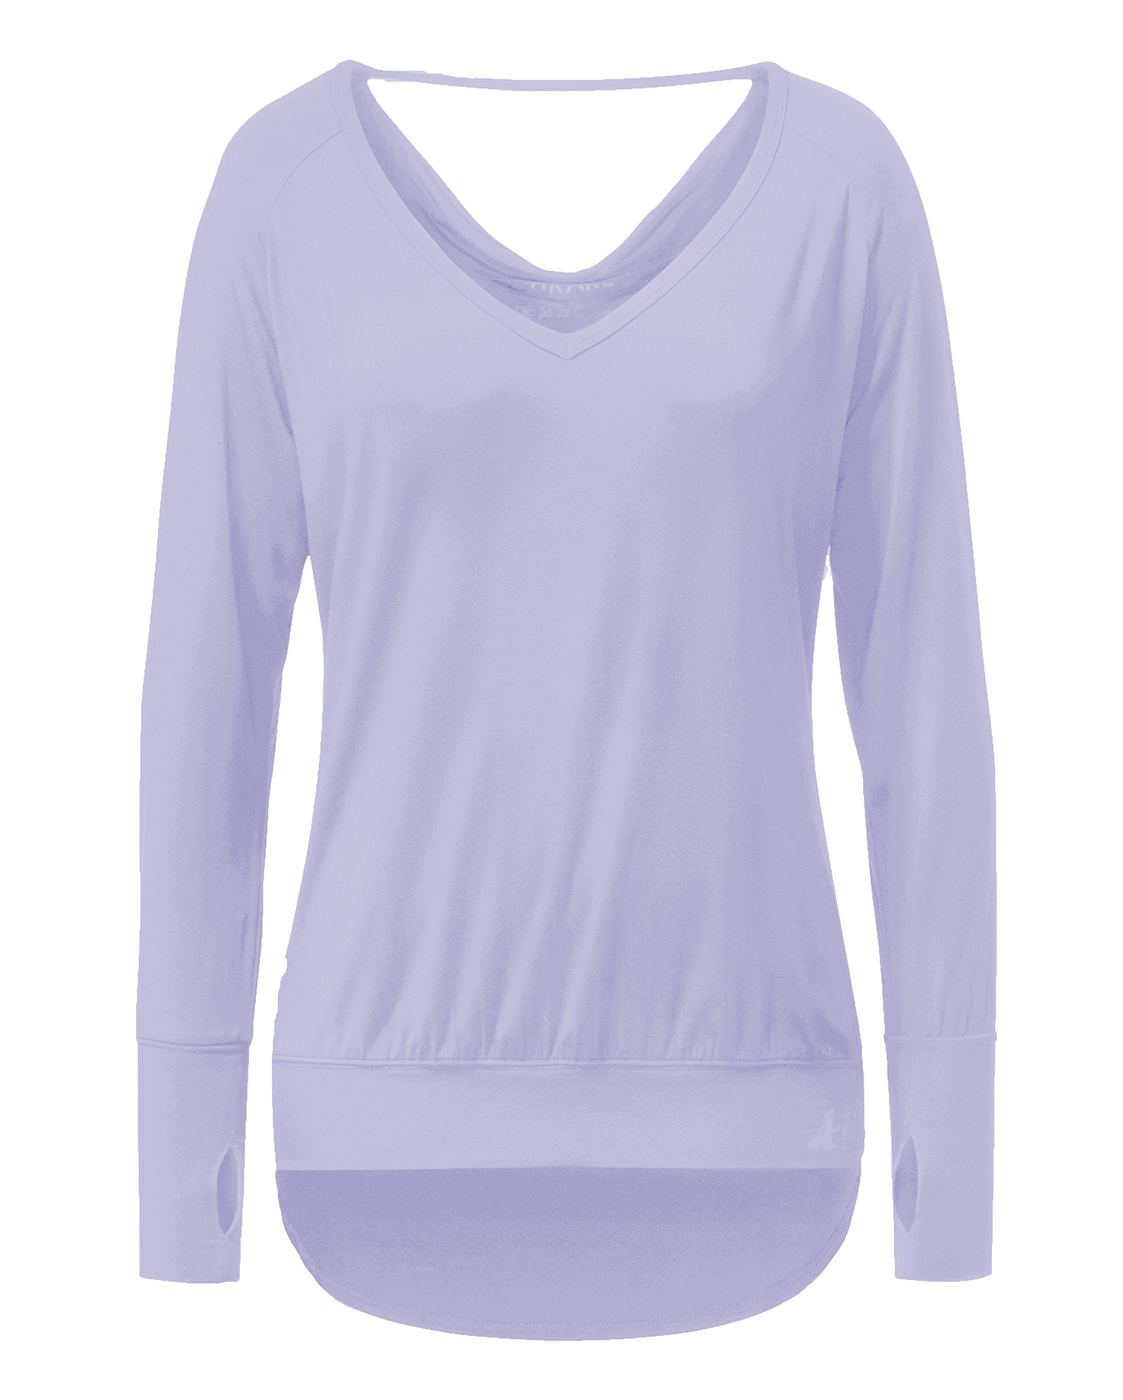 https://www.yogistar.com/out/pictures/master/product/1/yogi_shirt_langarm_pearl_front_web1400.jpg